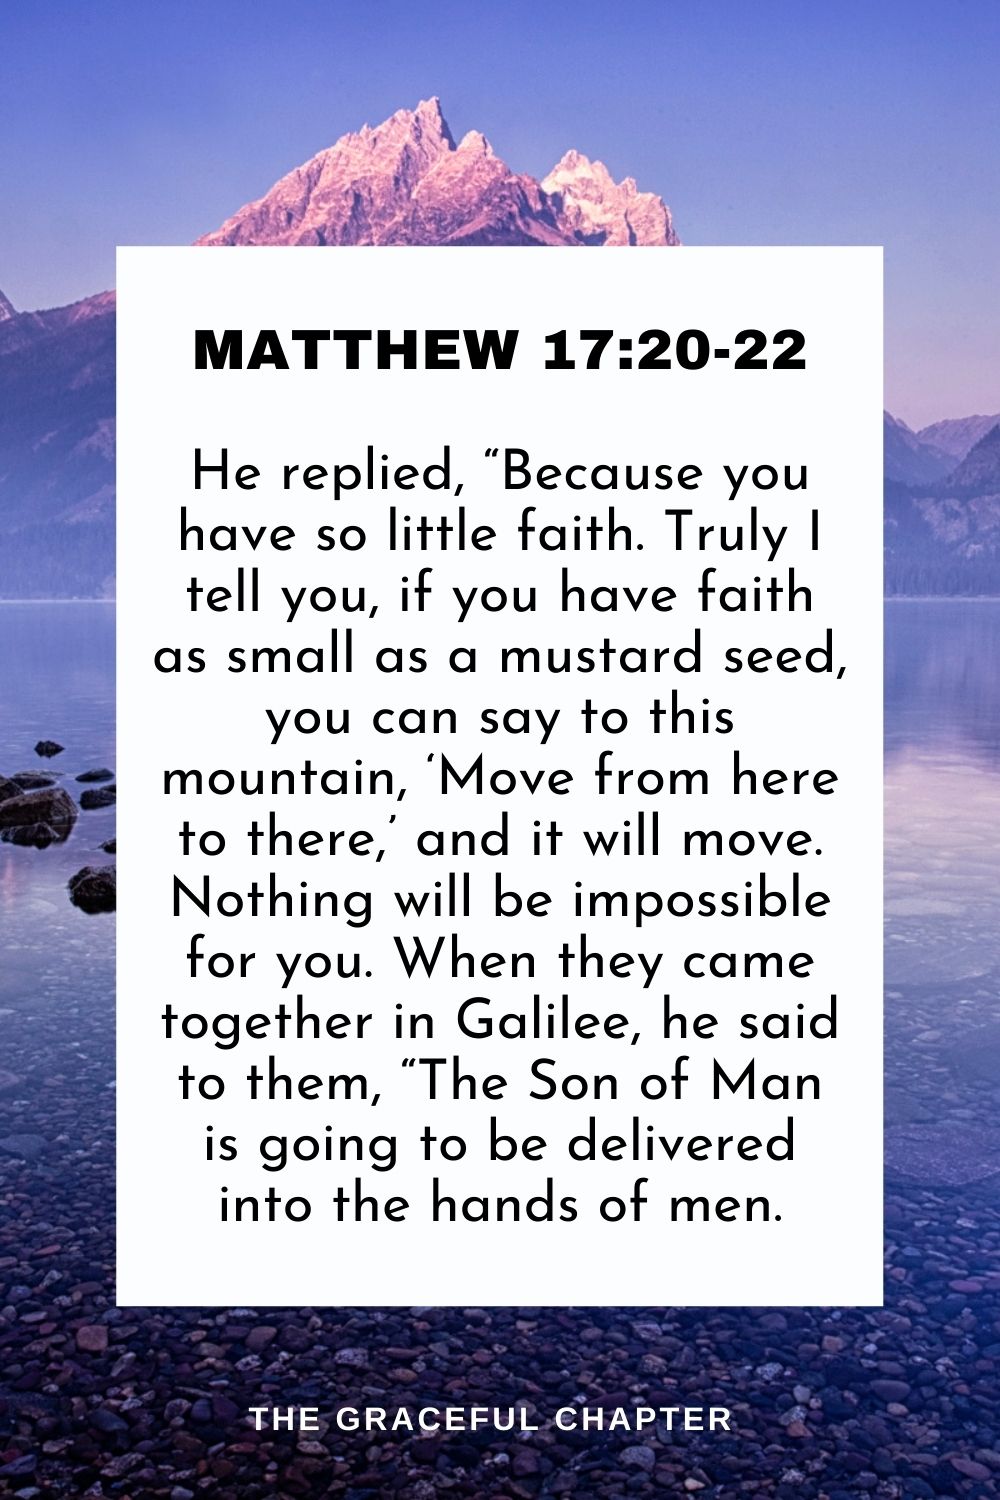 He replied, “Because you have so little faith. Truly I tell you, if you have faith as small as a mustard seed, you can say to this mountain, ‘Move from here to there,’ and it will move. Nothing will be impossible for you. When they came together in Galilee, he said to them, “The Son of Man is going to be delivered into the hands of men. Matthew 17:20-22